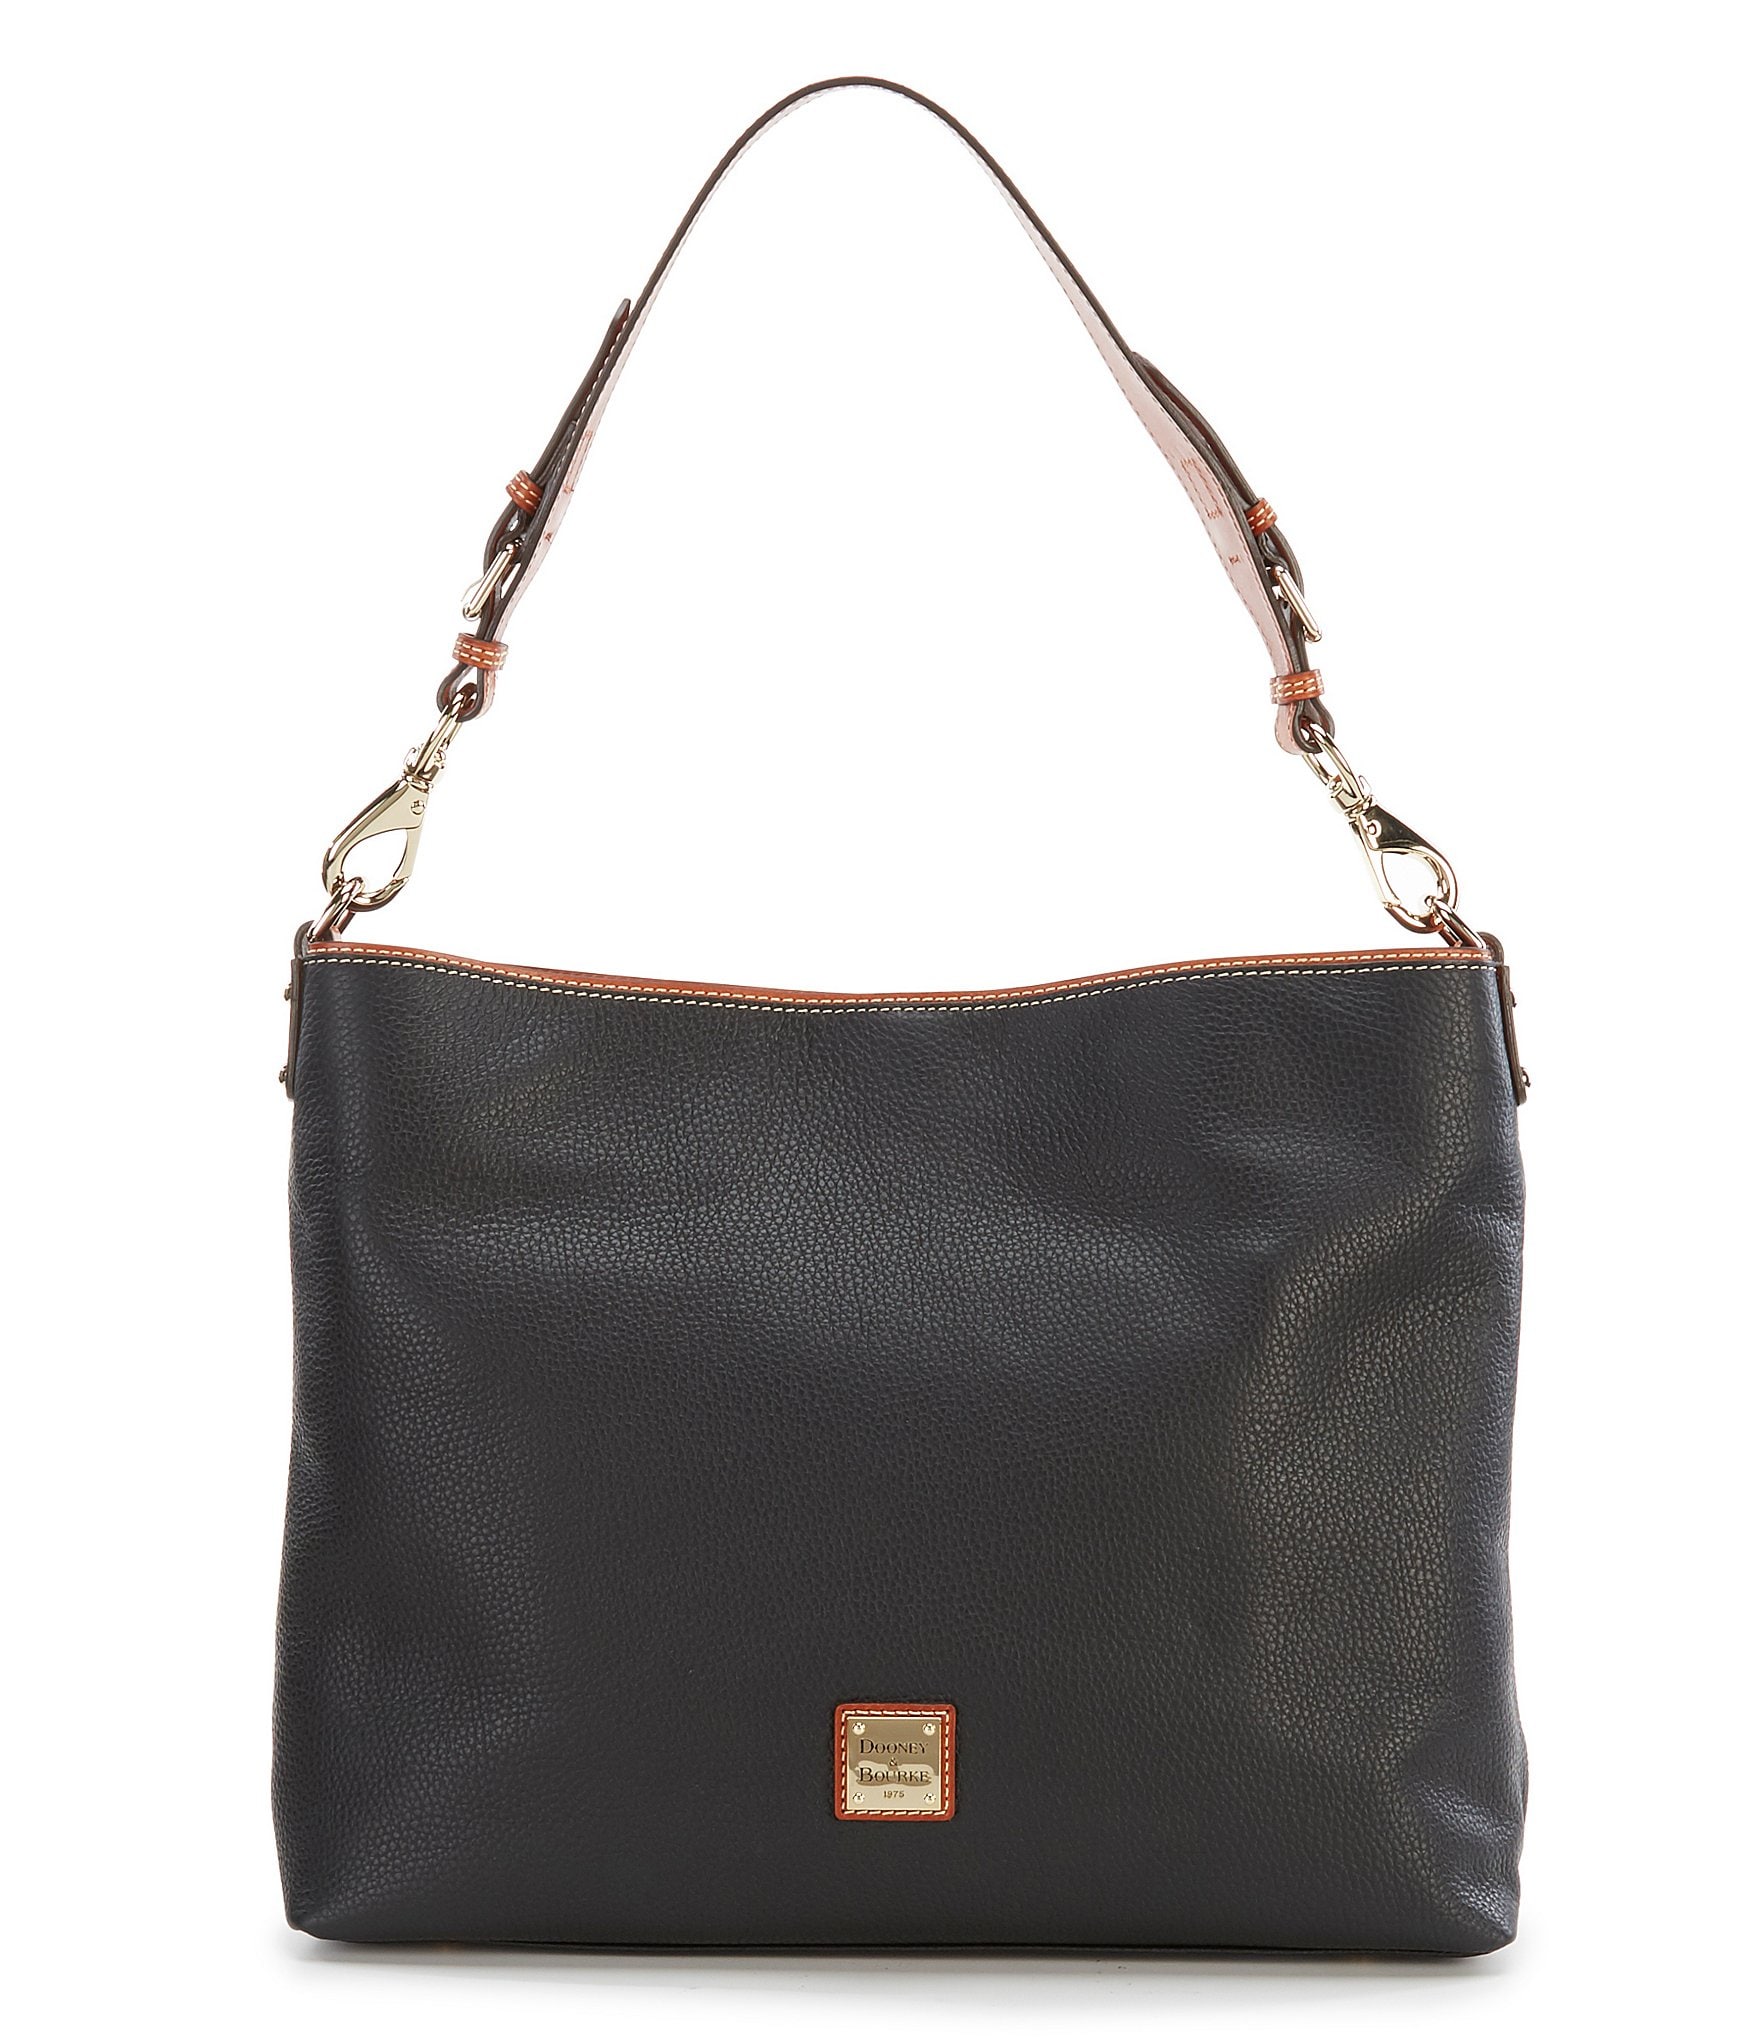 Dillards Dooney And Bourke Clearance Handbags | Confederated Tribes of the Umatilla Indian ...